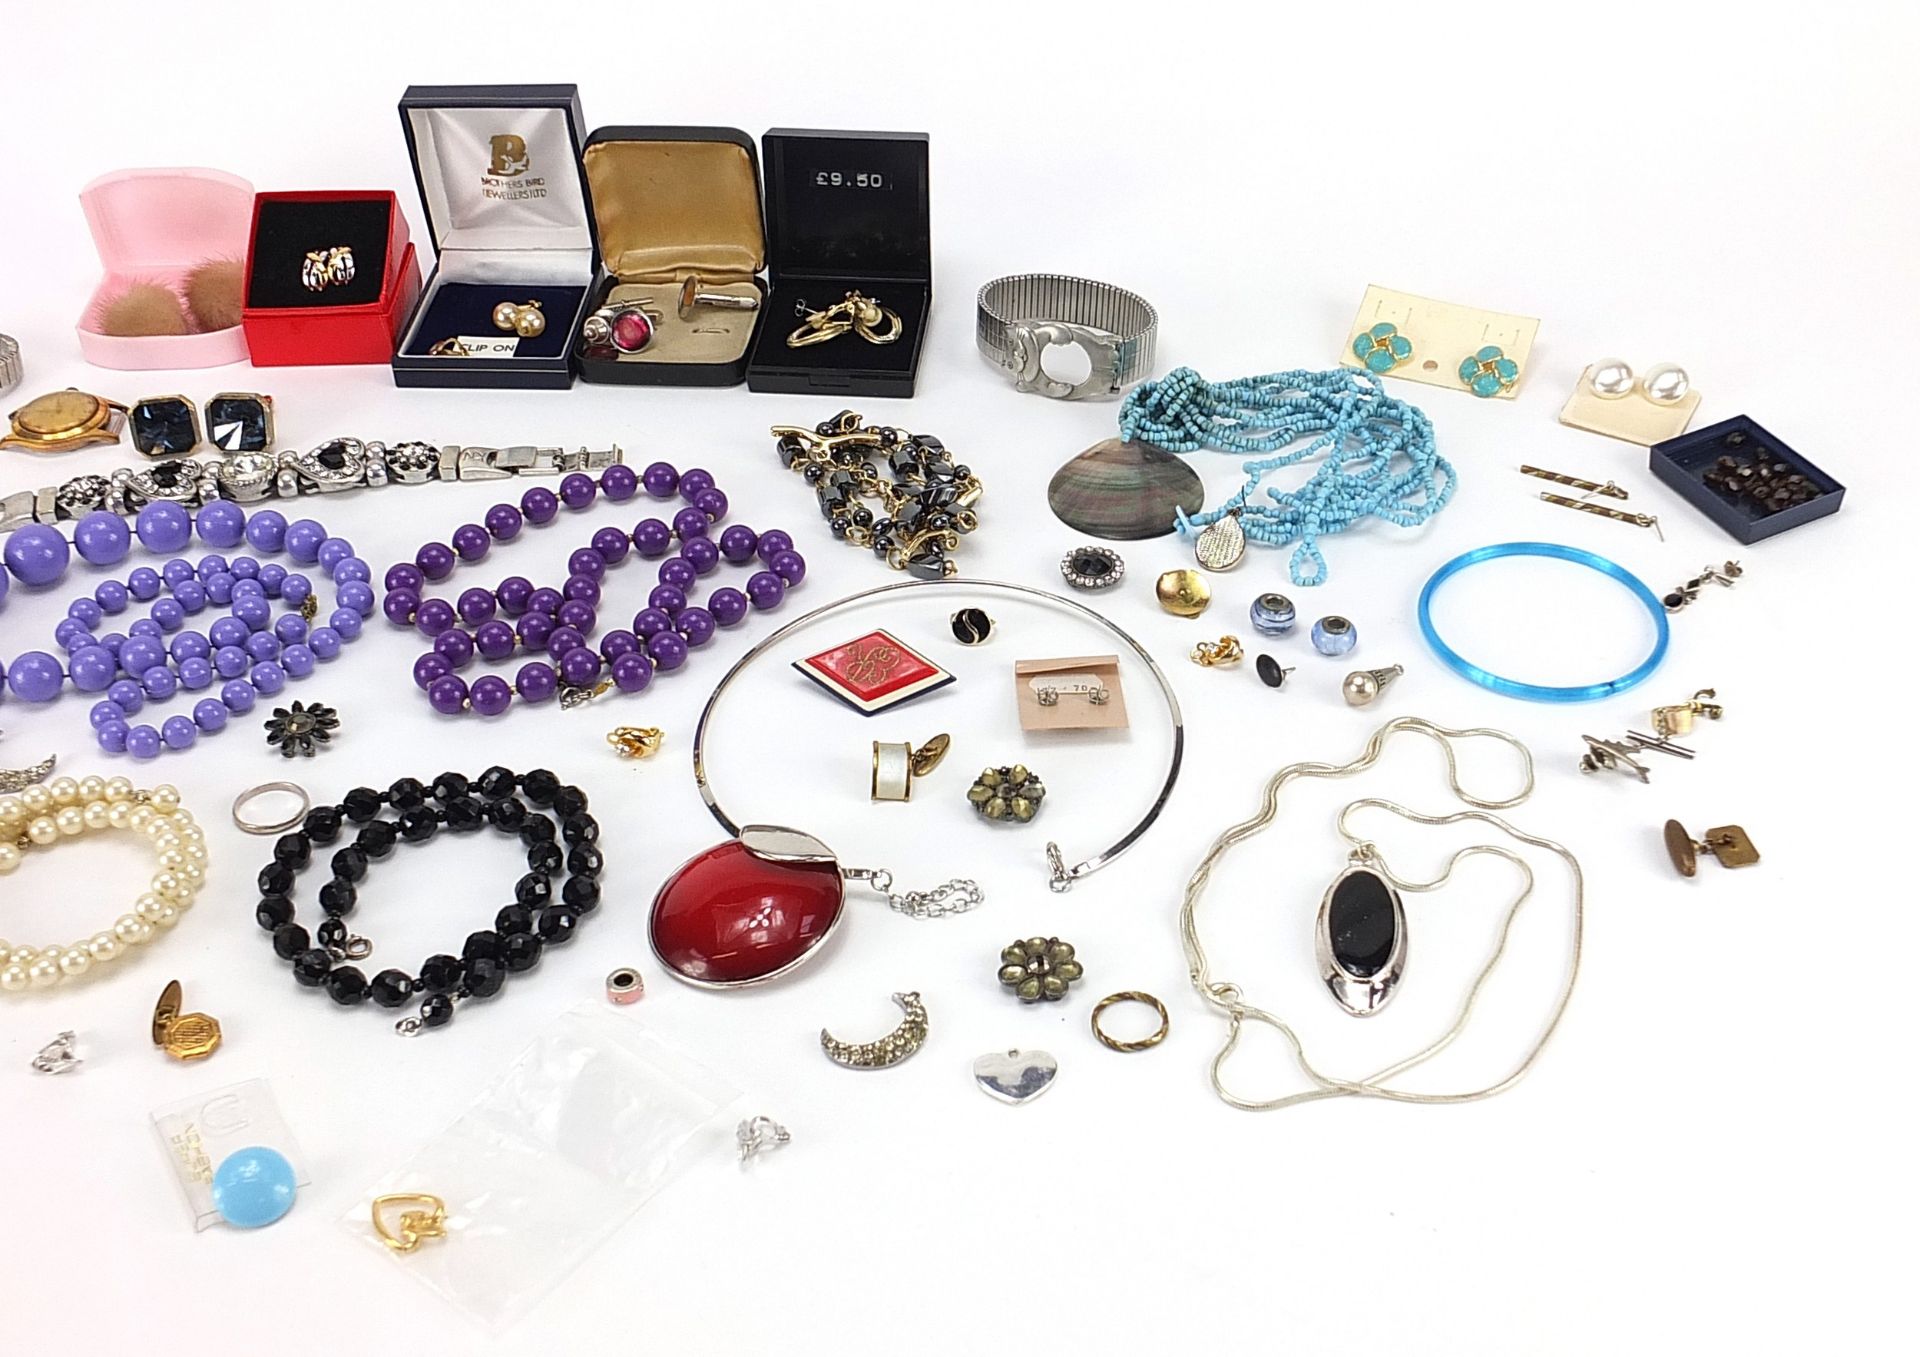 Vintage and later costume jewellery including necklaces, brooches, earrings and bracelets - Image 3 of 3